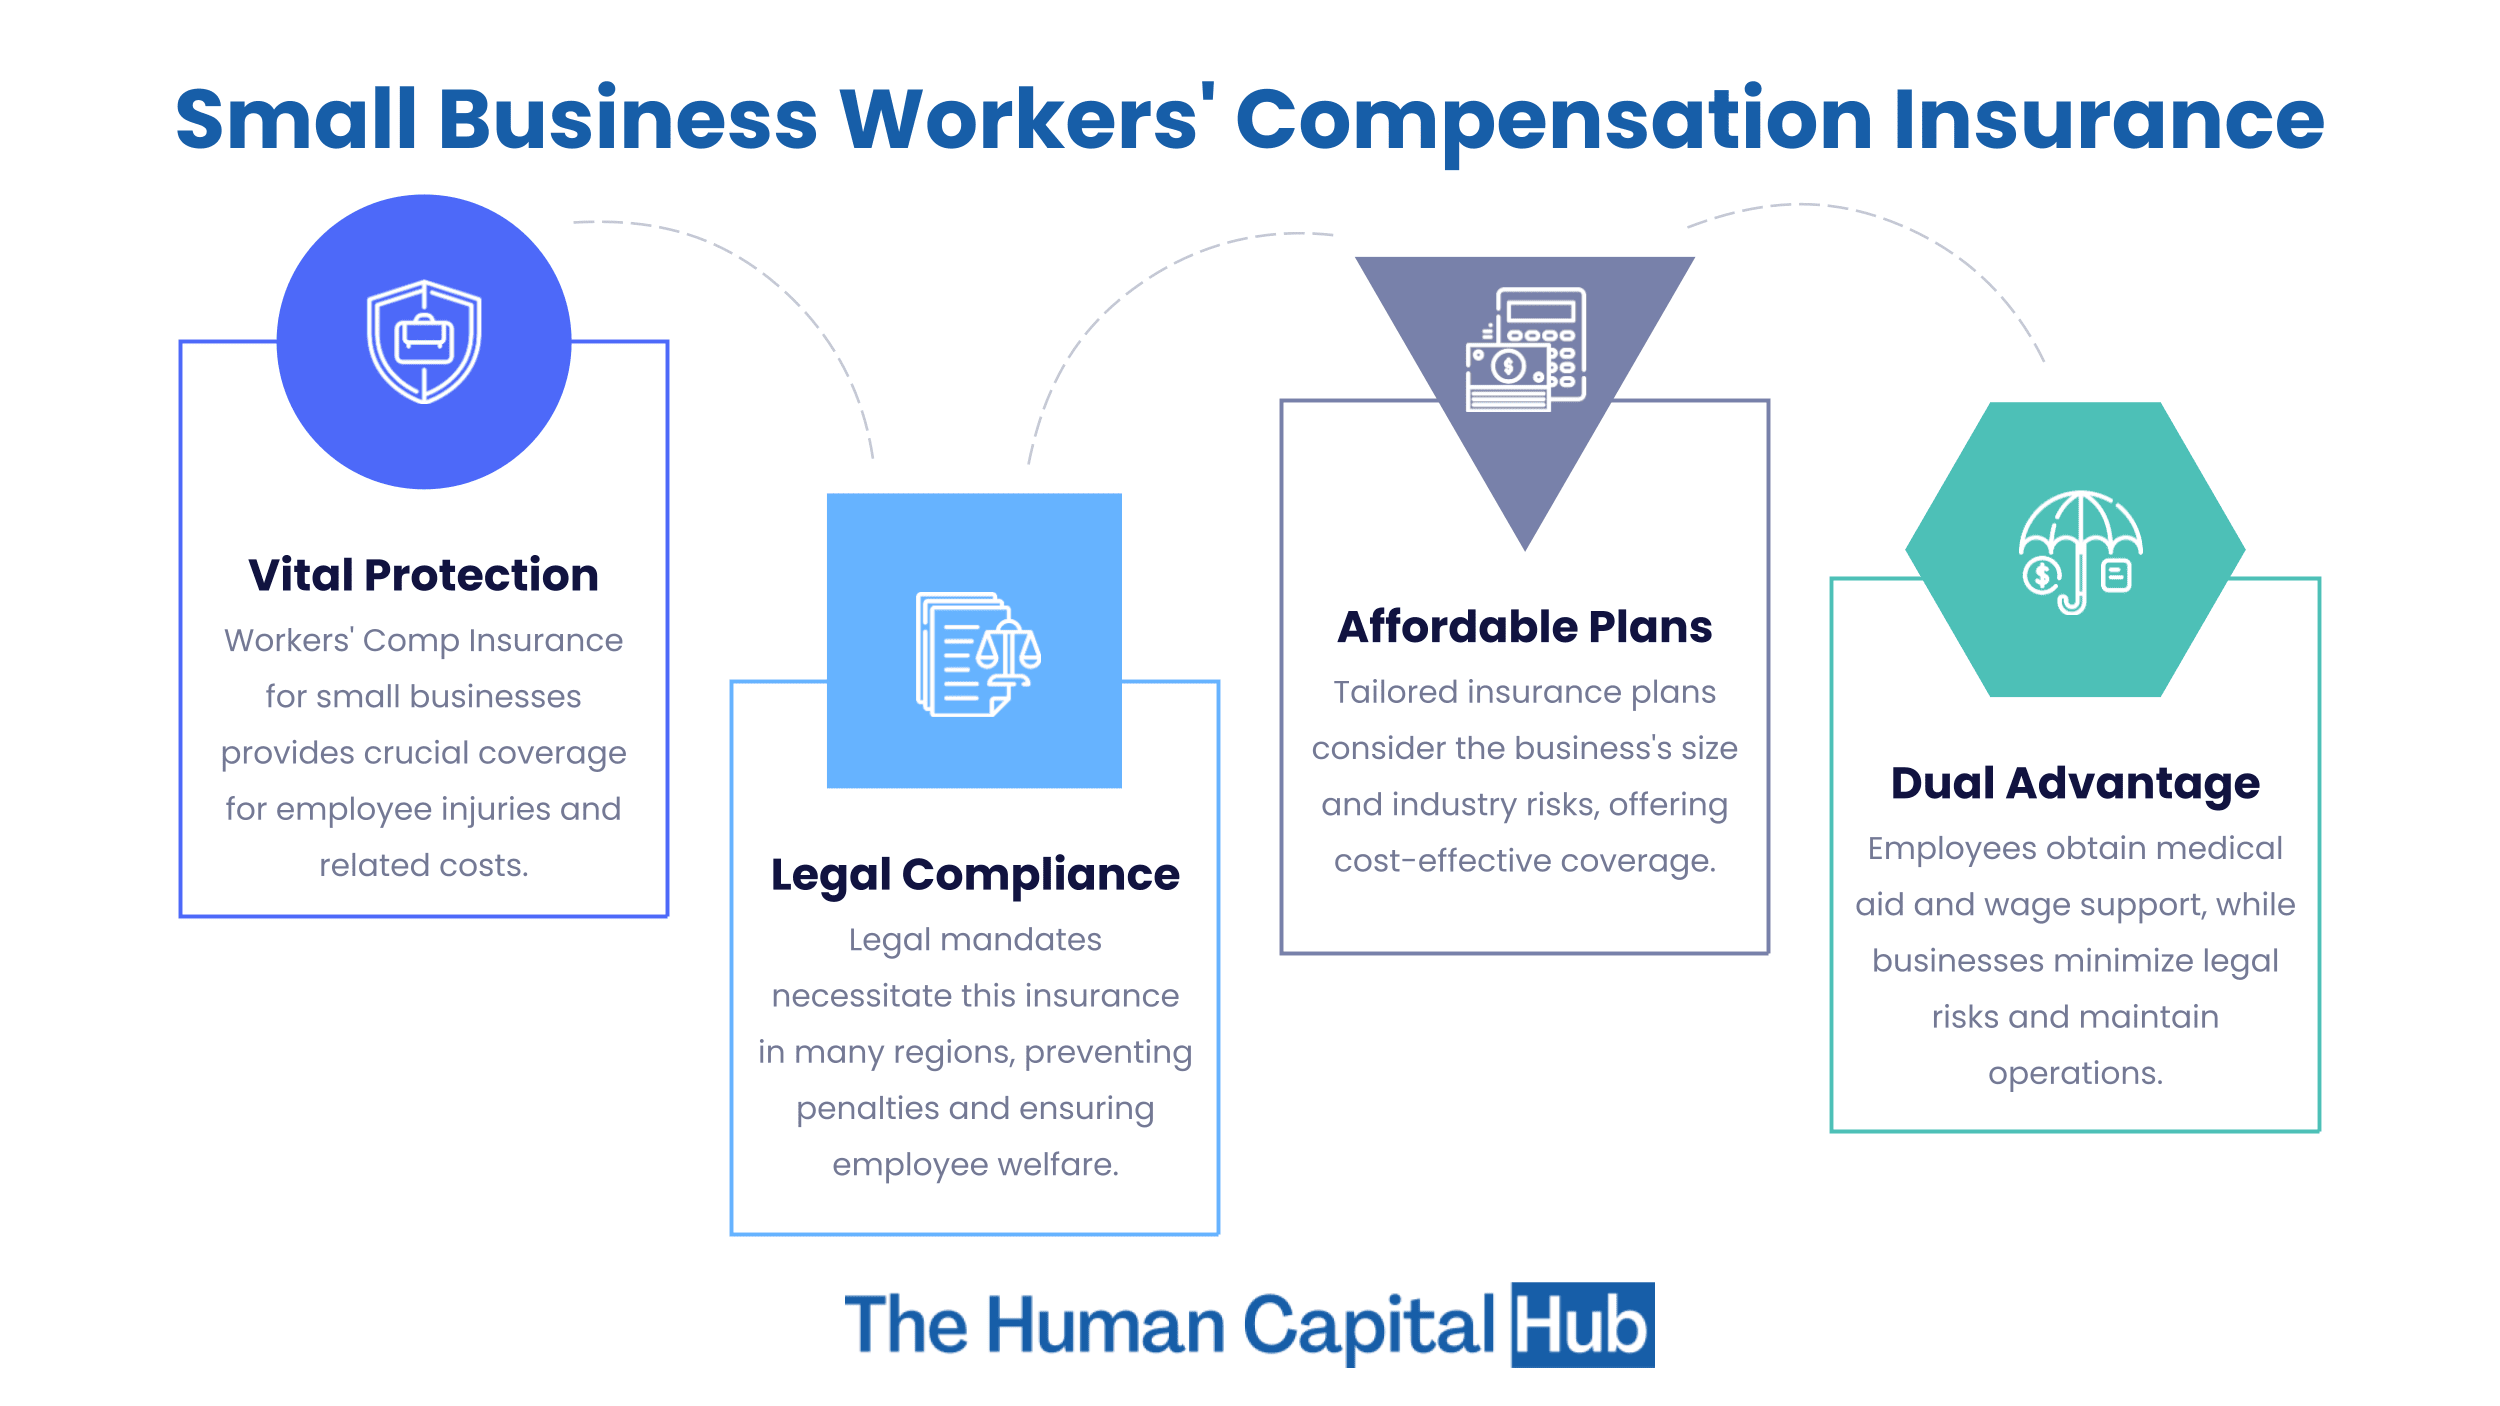 Small Business Insurance Workers' Compensation